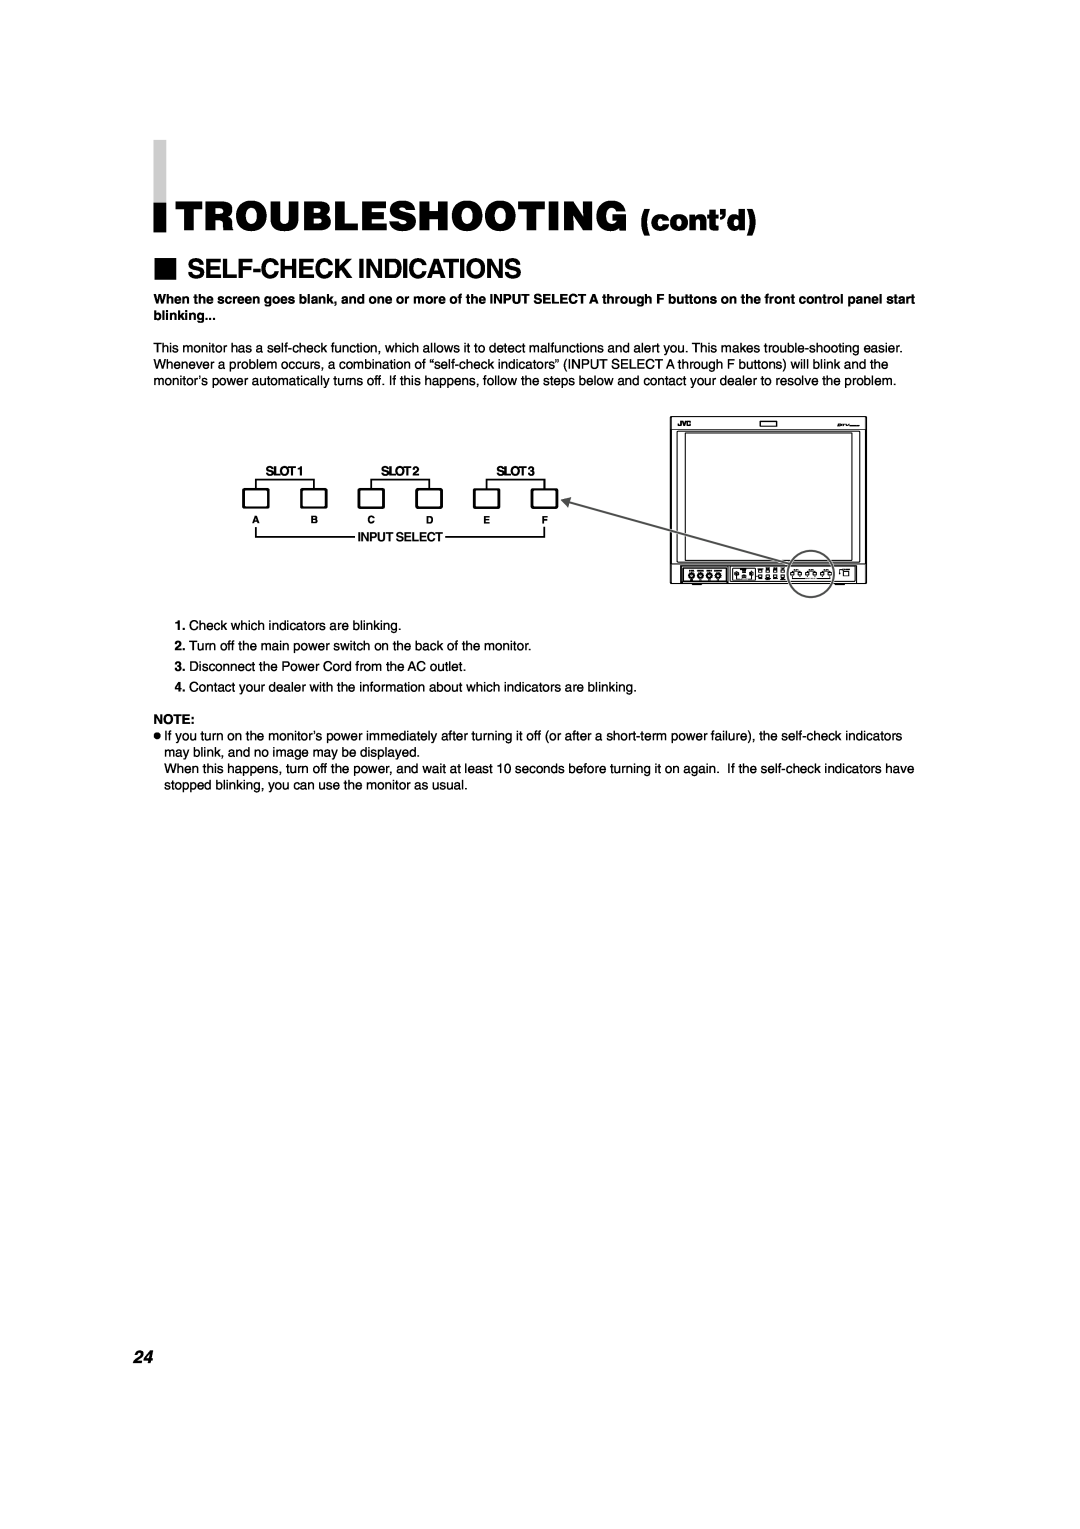 JVC DT-V1900CG manual TROUBLESHOOTING cont’d,  Self-Check Indications 